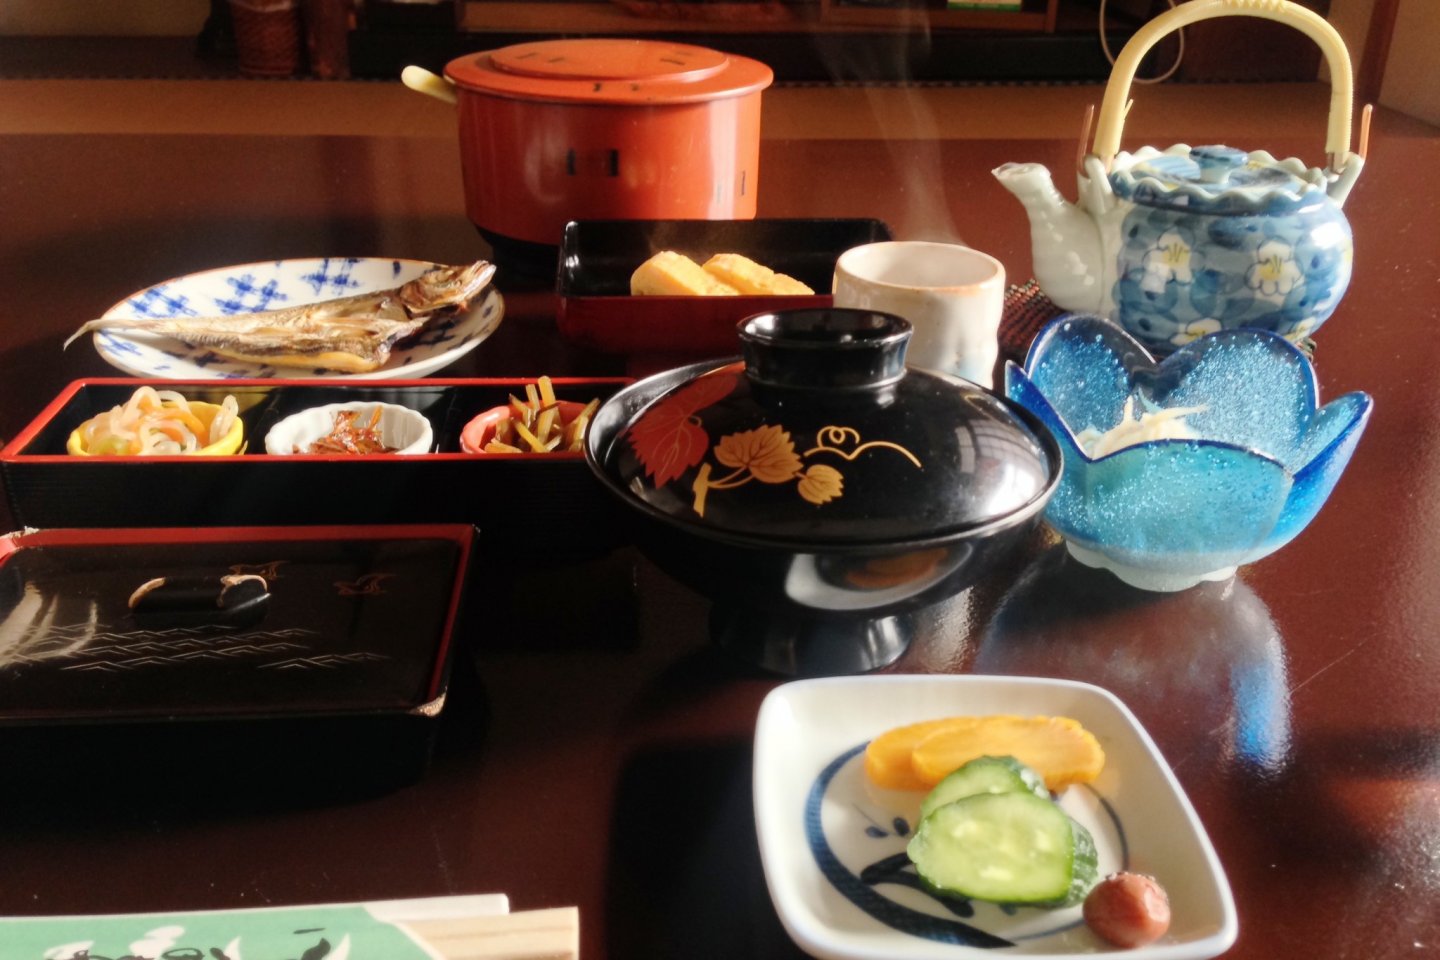 Stunning breakfast in your own room.  They only serve Japanese style cuisine here.